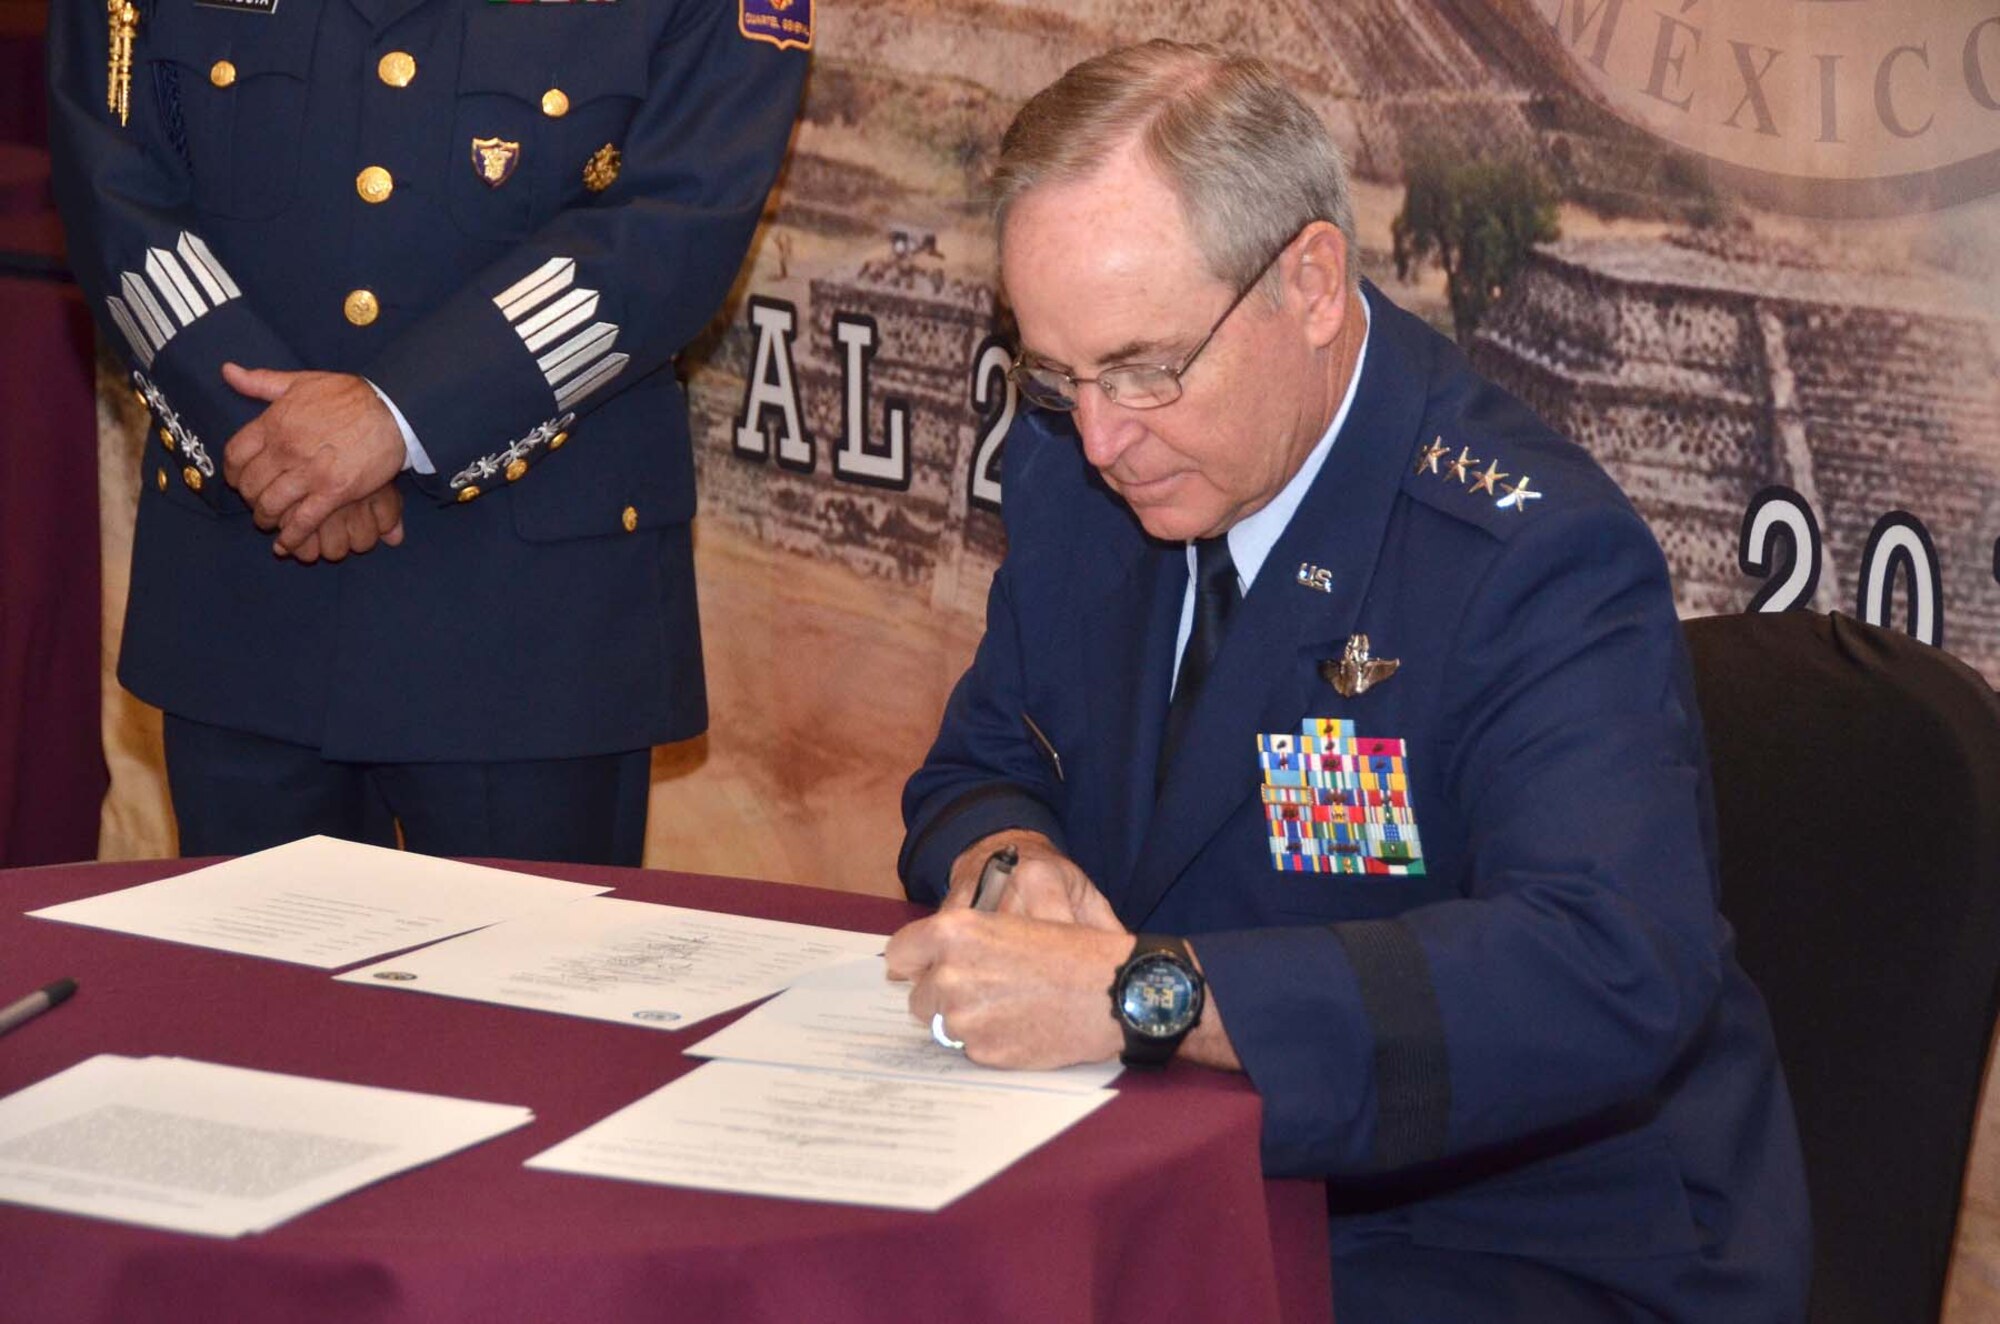 Air Force Chief of Staff Gen. Mark A. Welsh III signs an agreement at the conclusion of the Conference of American Air Chiefs June 25, 2015, in Mexico City. The conference is an annual event sponsored by the System of Cooperation Among American Air Chiefs, which is headquartered at Davis-Monthan Air Force Base, Ariz., and includes representatives from 20 Western Hemisphere air forces. (U.S. Air Force photo/Capt. Bryan Bouchard)